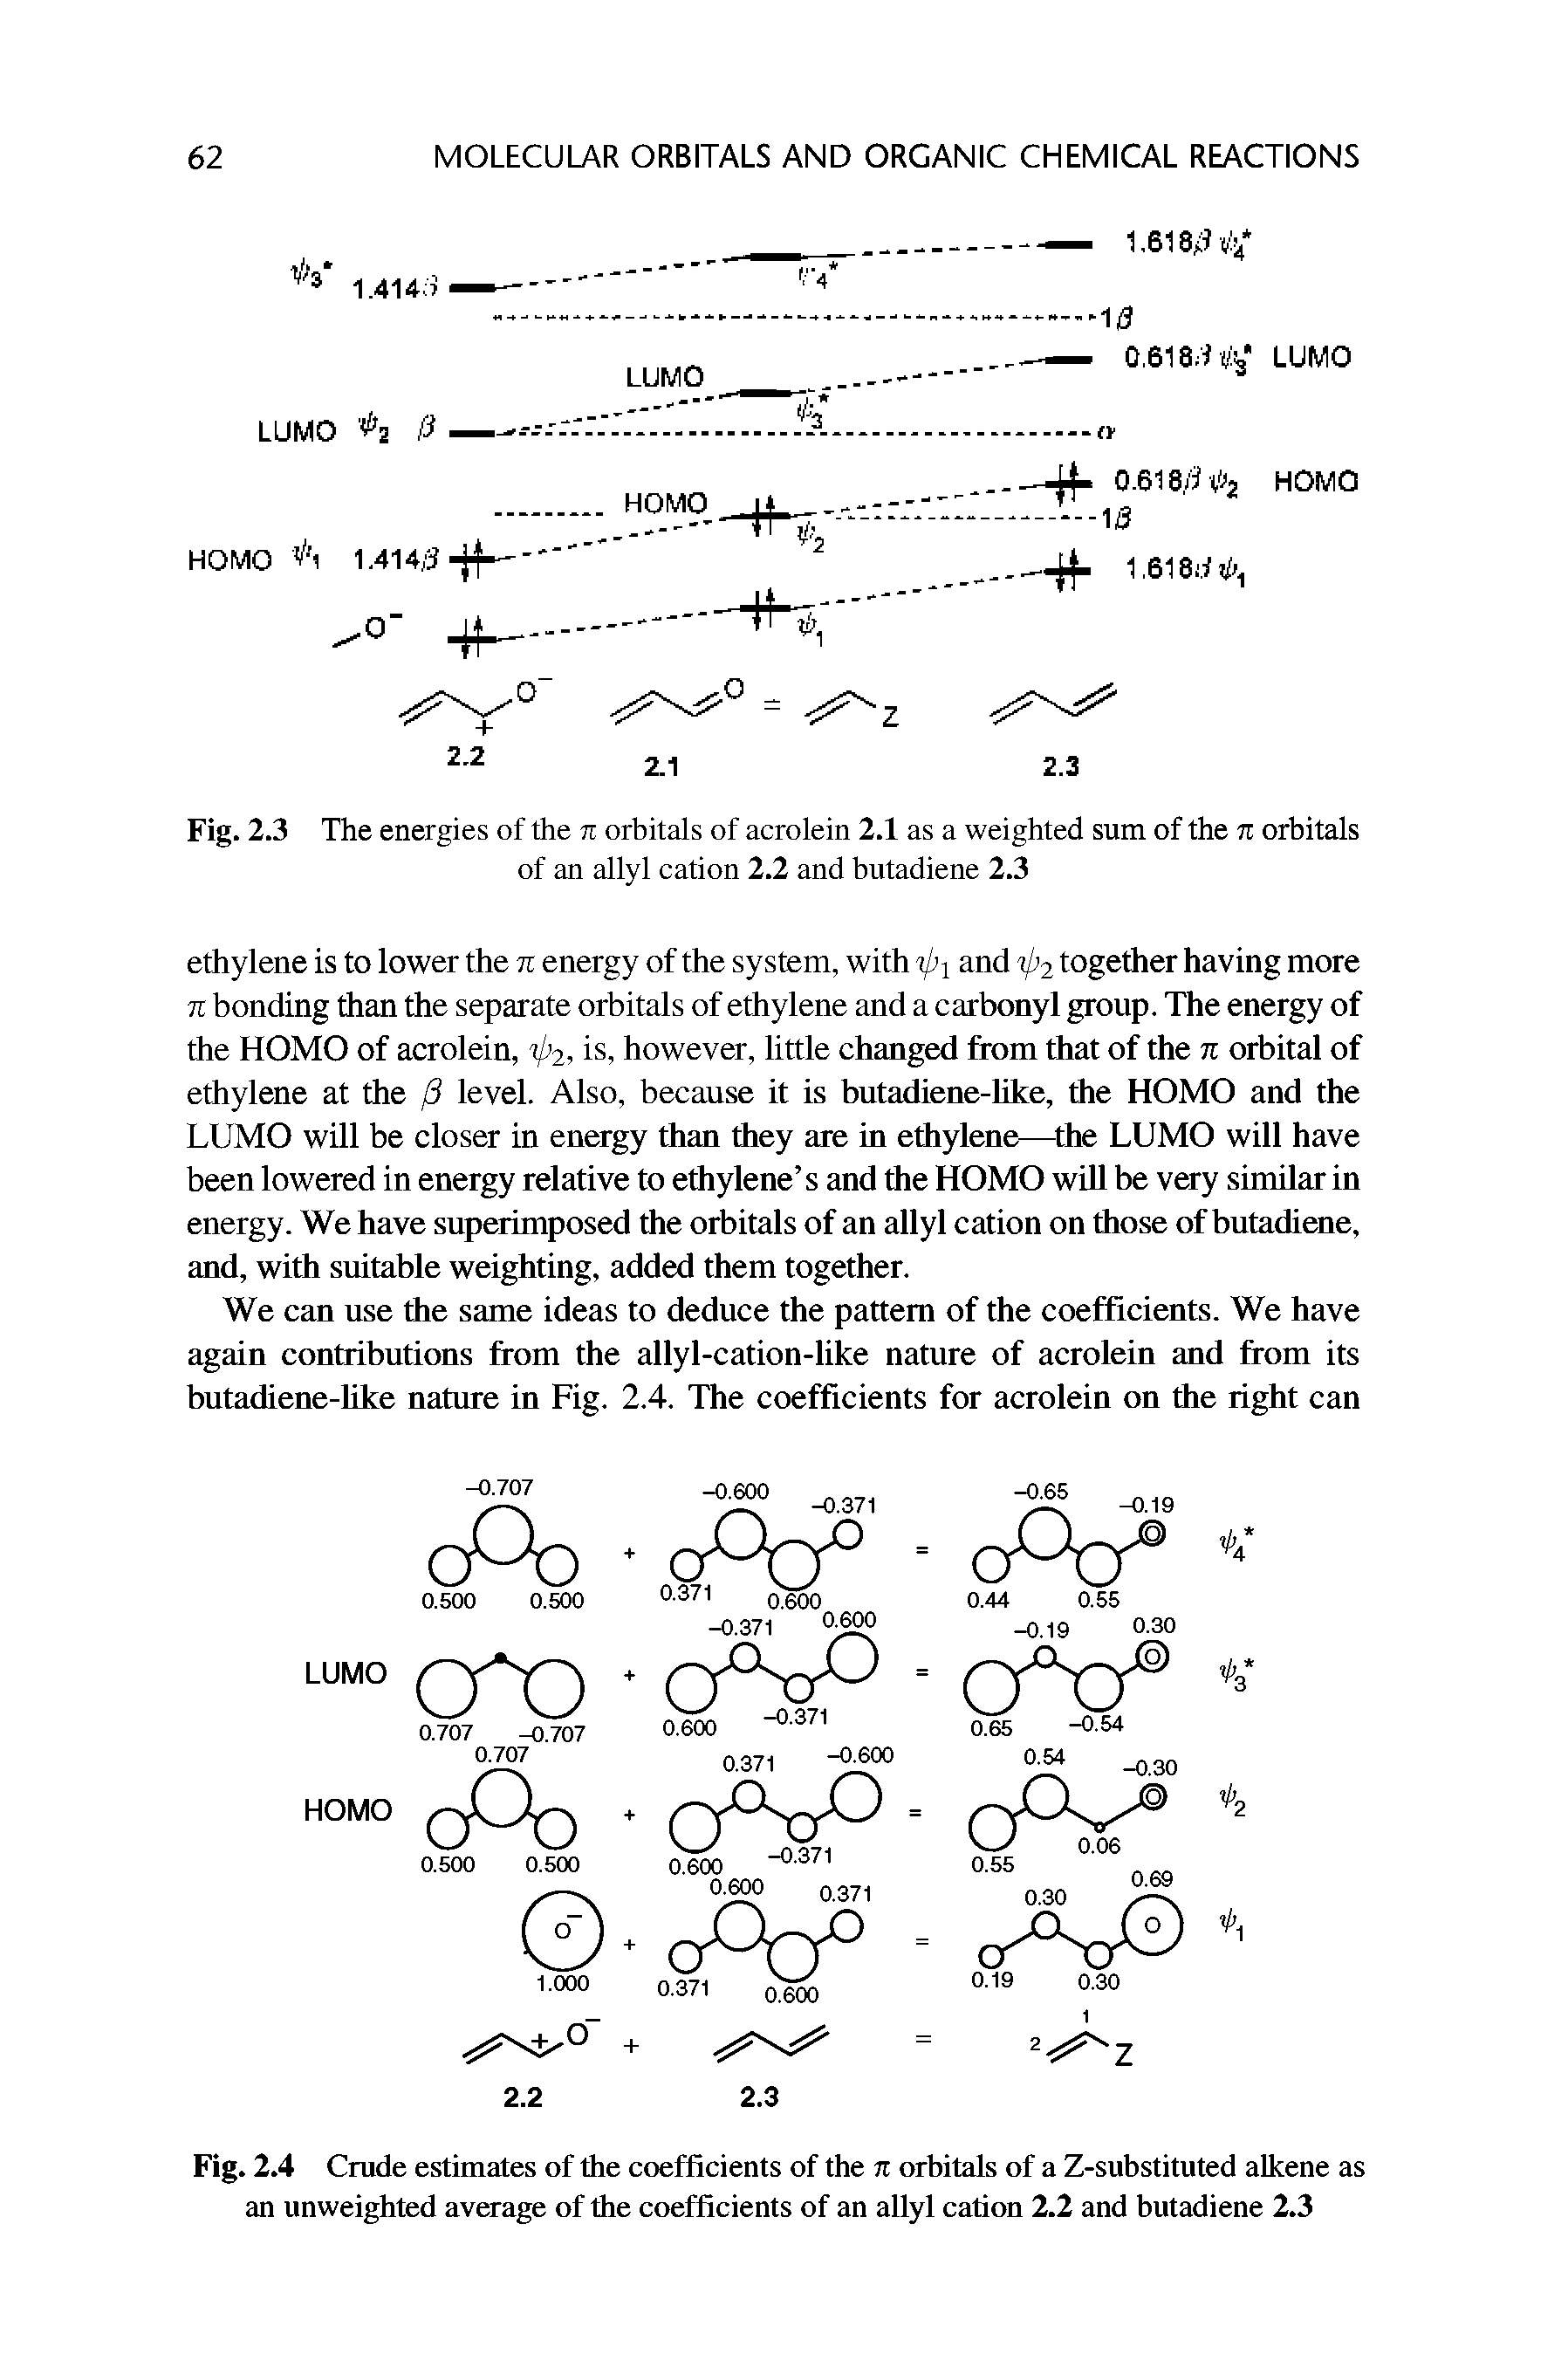 Fig. 2.4 Crude estimates of the coefficients of the n orbitals of a Z-substituted alkene as an unweighted average of the coefficients of an allyl cation 2.2 and butadiene 2.3...